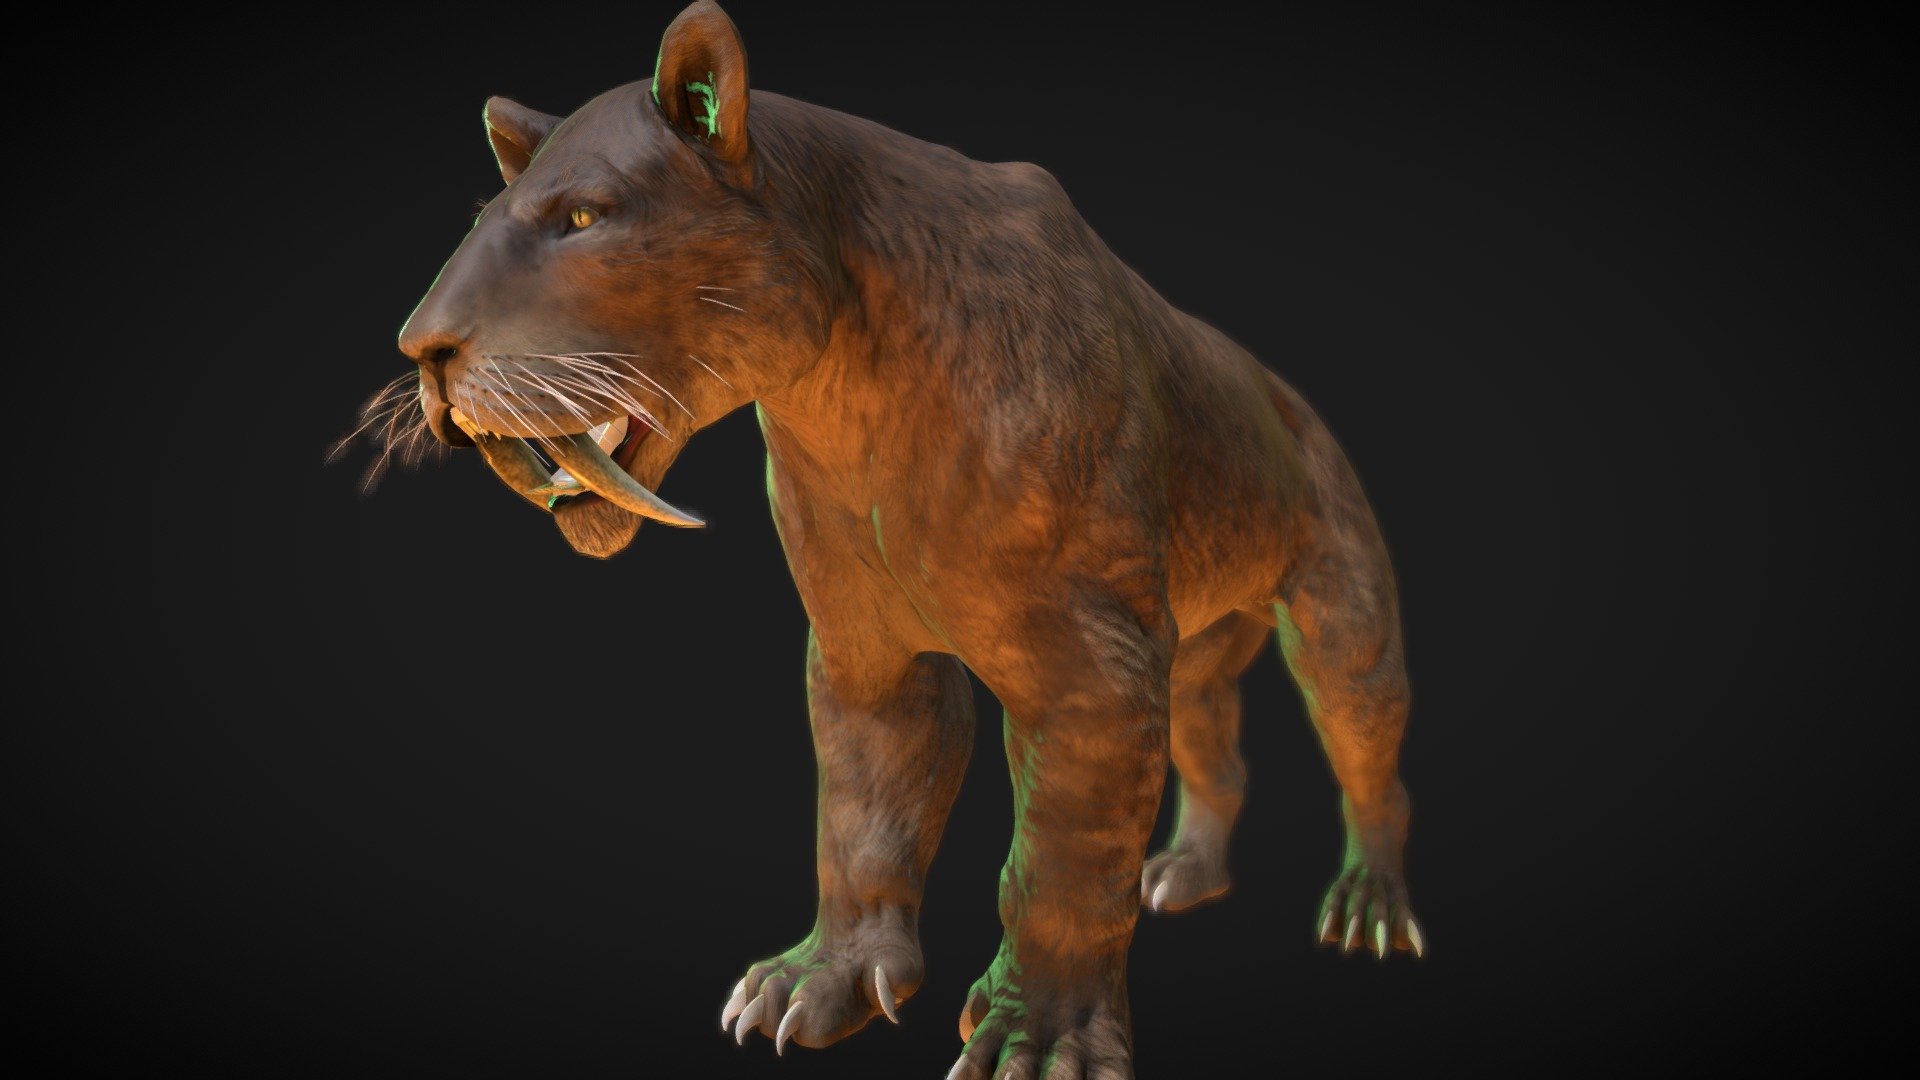 Smilodon, commonly known as the saber-toothed cat, was a remarkable and iconic predator that lived during the Pleistocene epoch. These large cats were characterized by their long, curved canine teeth, which were adapted for stabbing and slashing rather than simply biting.

There are several species of Smilodon, with Smilodon fatalis being one of the most well-known. These saber-toothed cats were formidable predators, likely preying on large herbivores such as bison and camels. The length of their canines indicates a specialized hunting strategy, using their impressive teeth to deliver powerful and precise bites to the necks of their prey.

Explore the Pleistocene landscapes with Smilodon, an apex predator that left an indelible mark on the prehistoric world. Uncover the mysteries of these saber-toothed cats with - Smilodon - Buy Royalty Free 3D model by robertfabiani 3d model